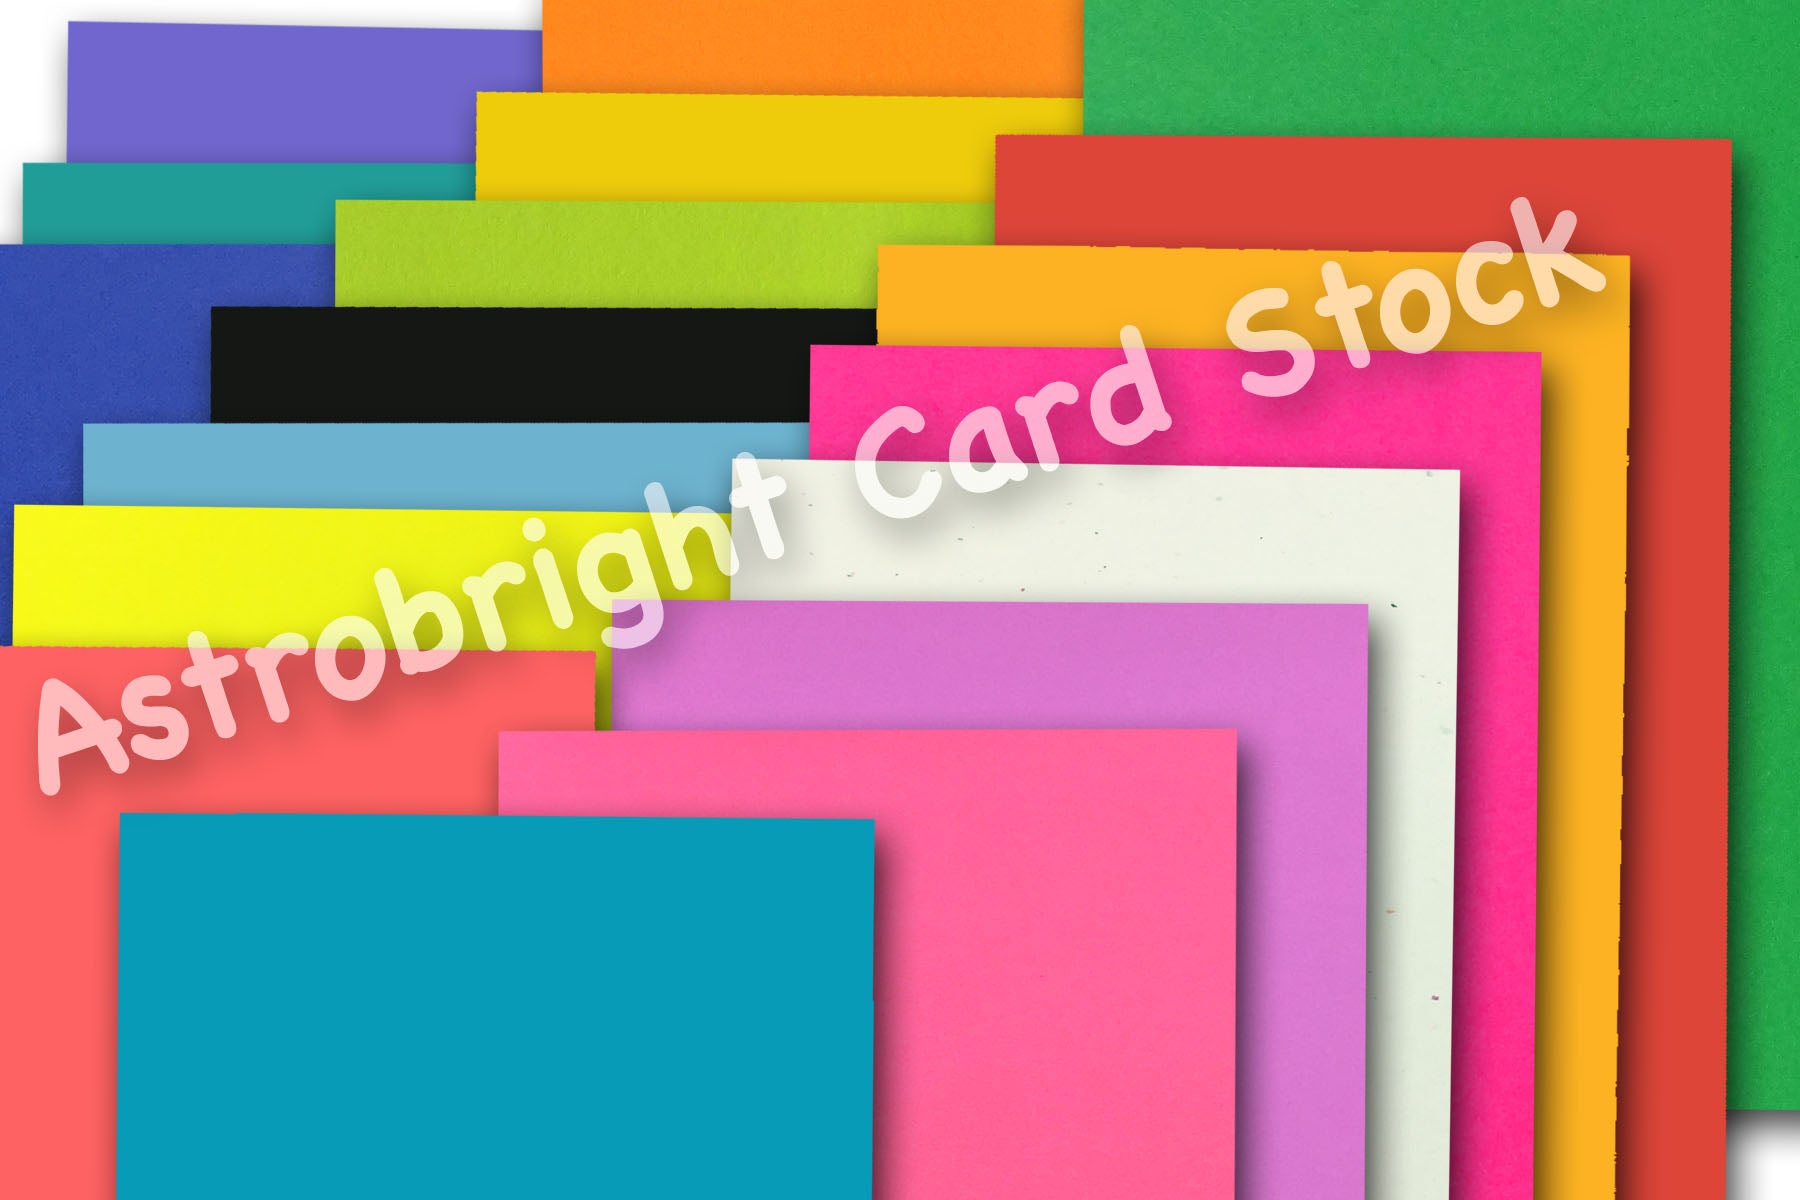 Astrobright Cardstock designs, themes, templates and downloadable